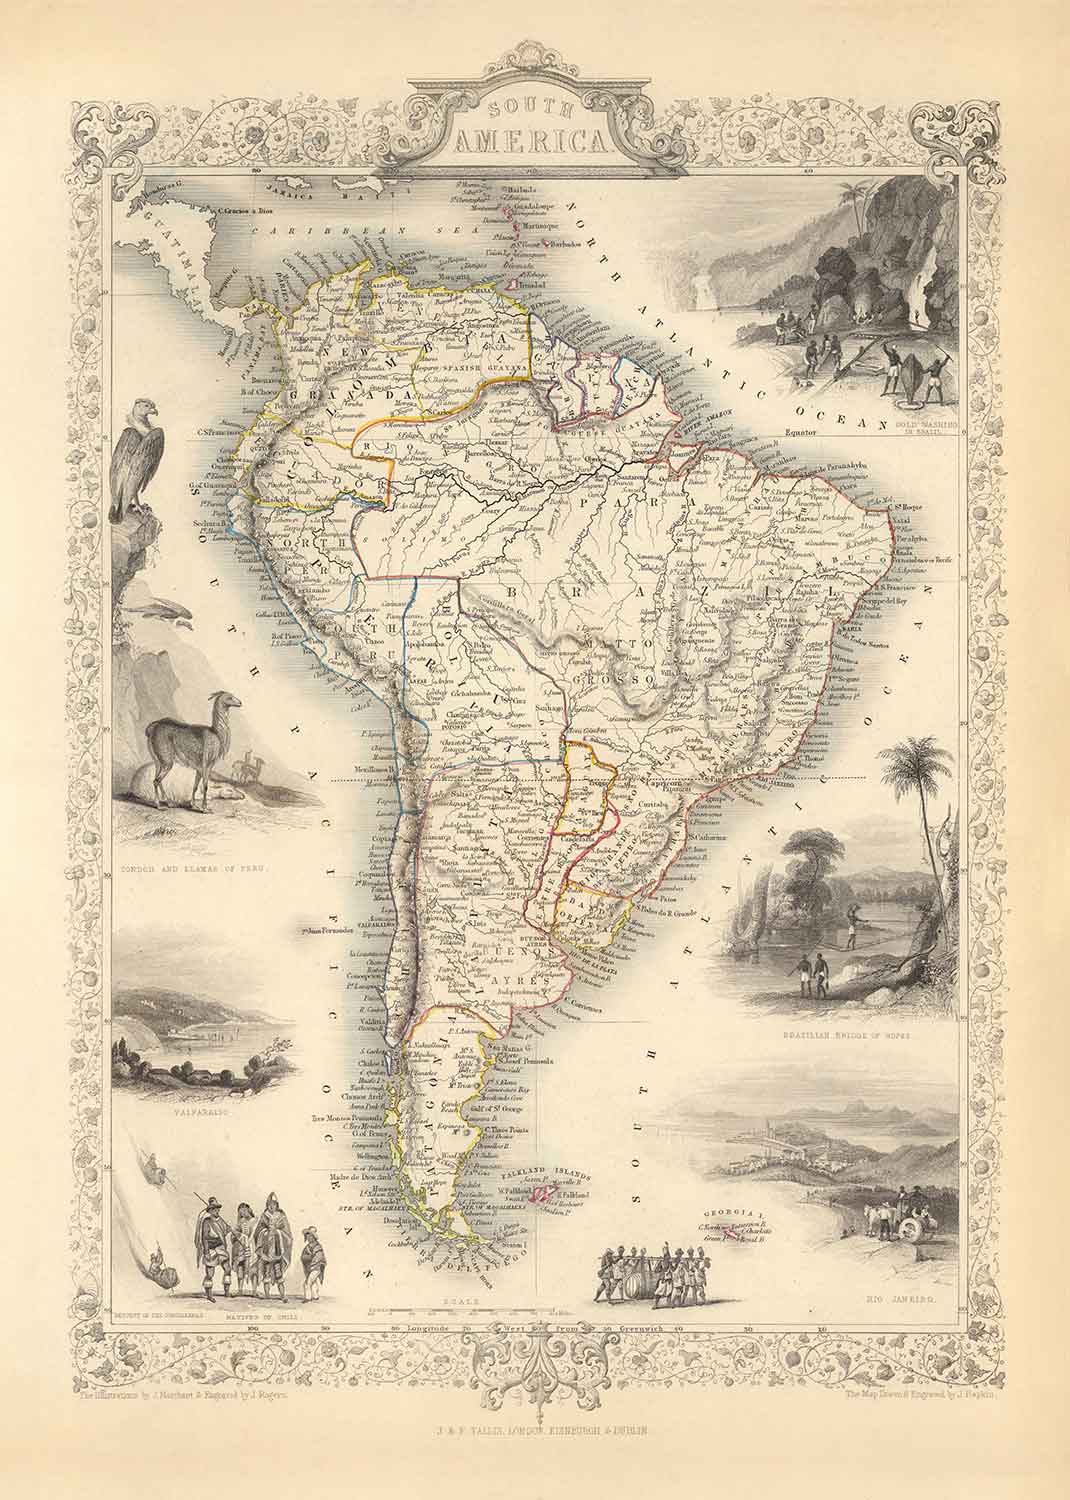 Old Map of South America, 1851 by Tallis & Rapkin - Portuguese Colonialism, Gold Washing, Amazon, Brazil, Colombia